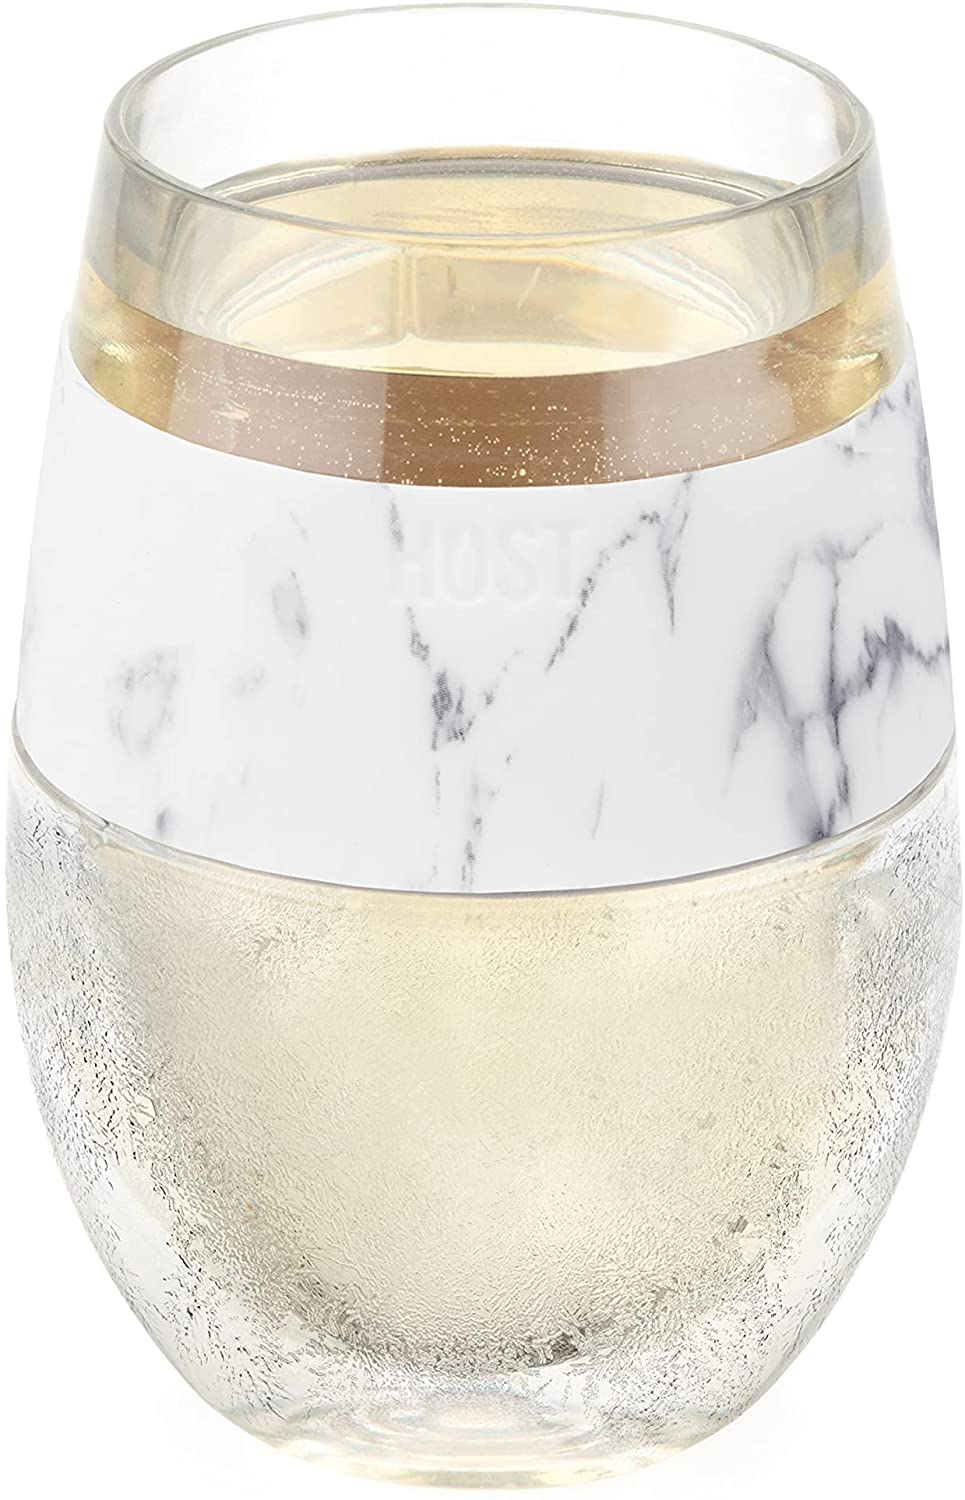 HOST Frozen Insulated Wine Tumbler, 8.5-Ounce